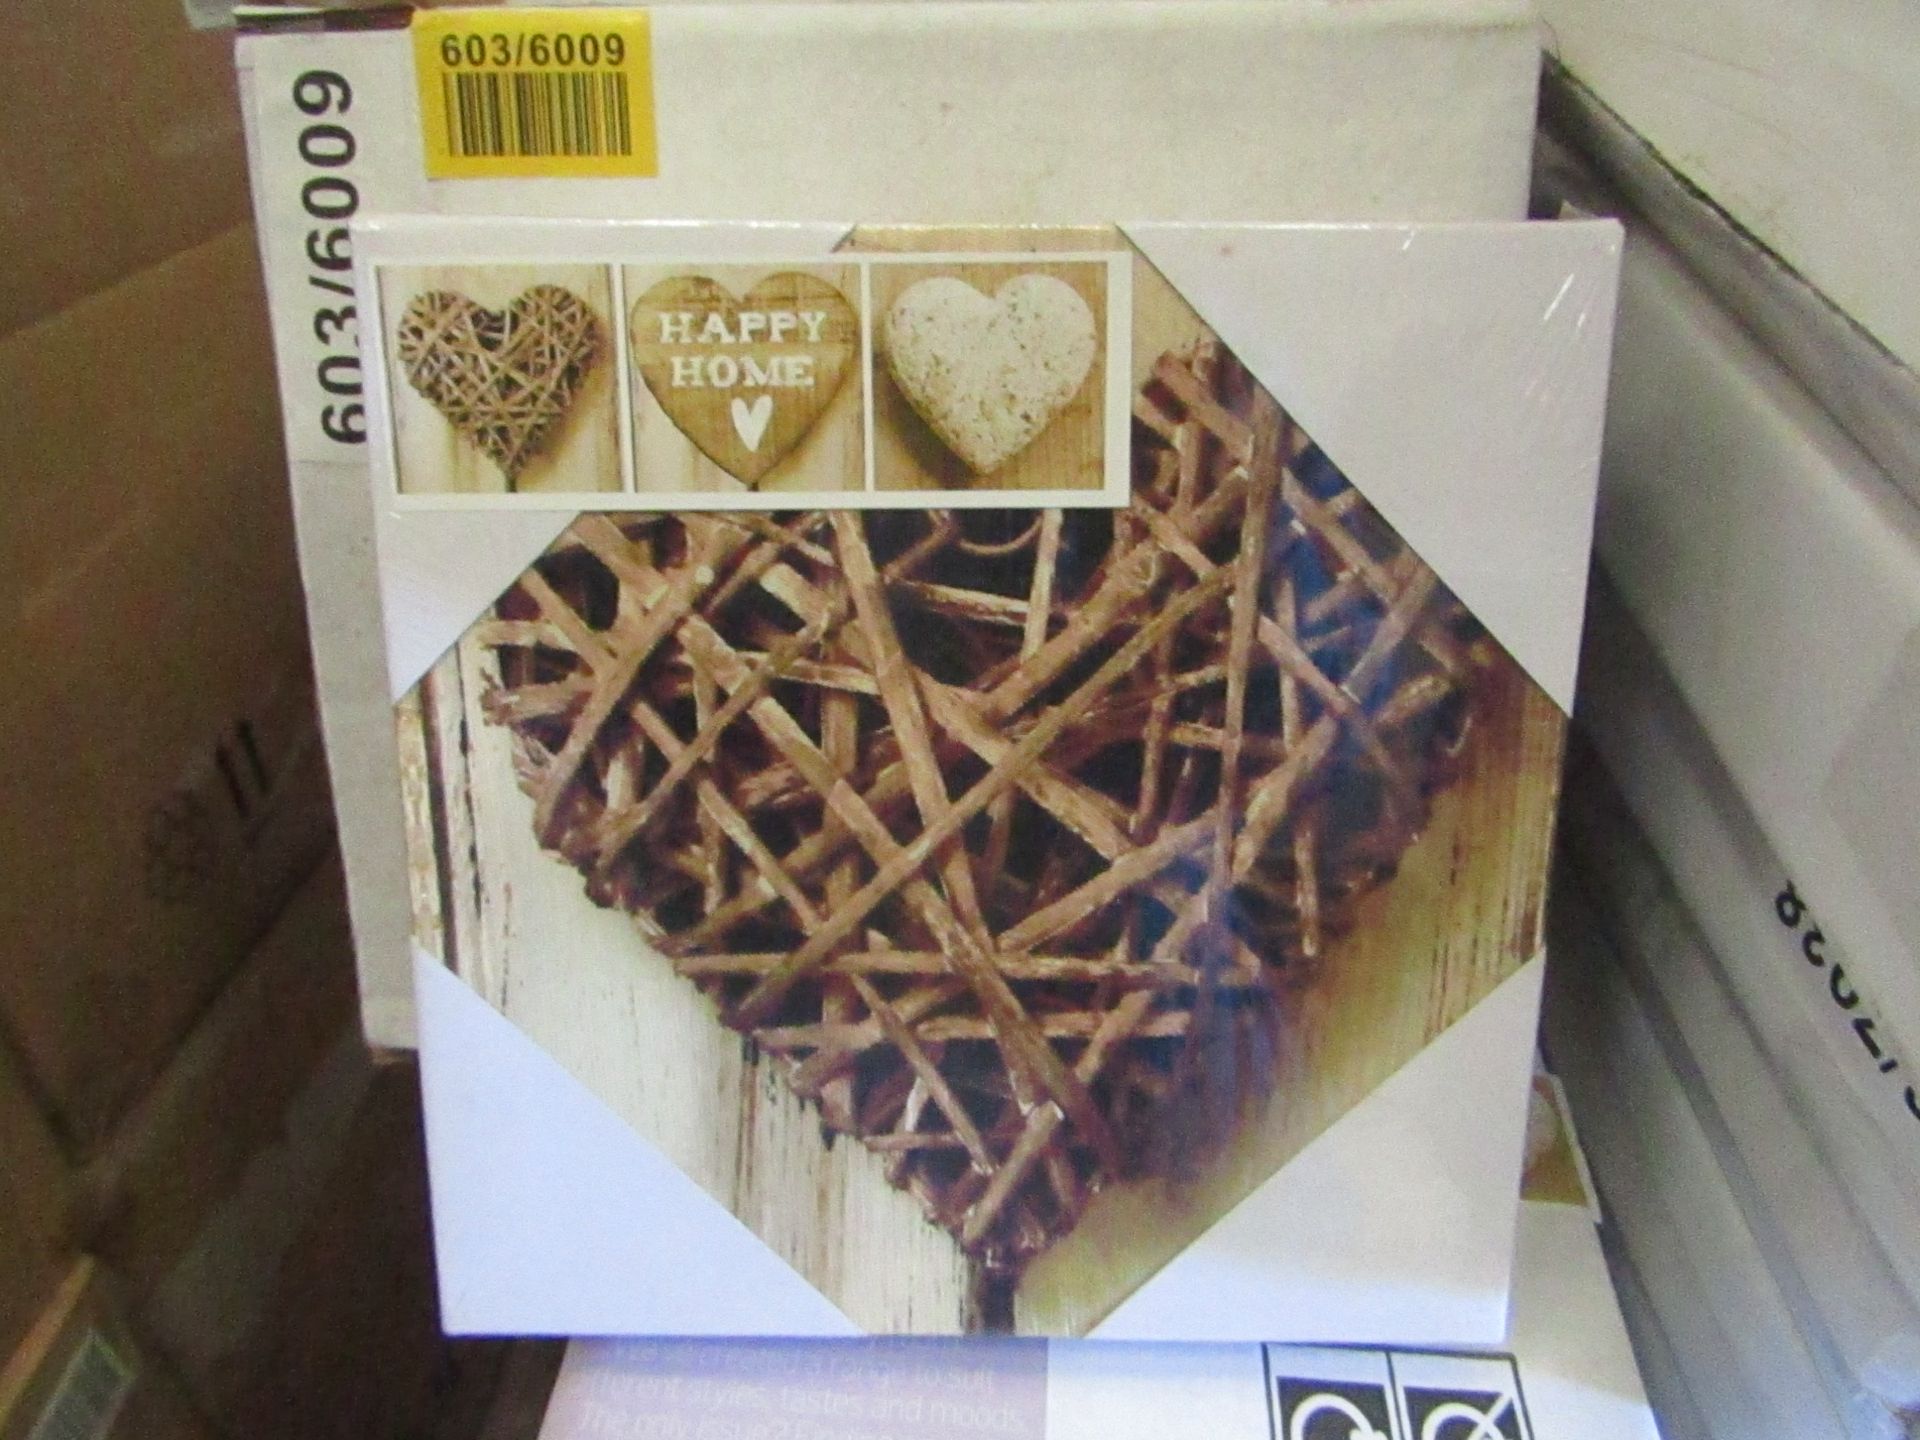 1 x box of 10 sets of 3 "Hearts" Canvases By Arthouse Wall Art size 20cm x 20cm new & packaged